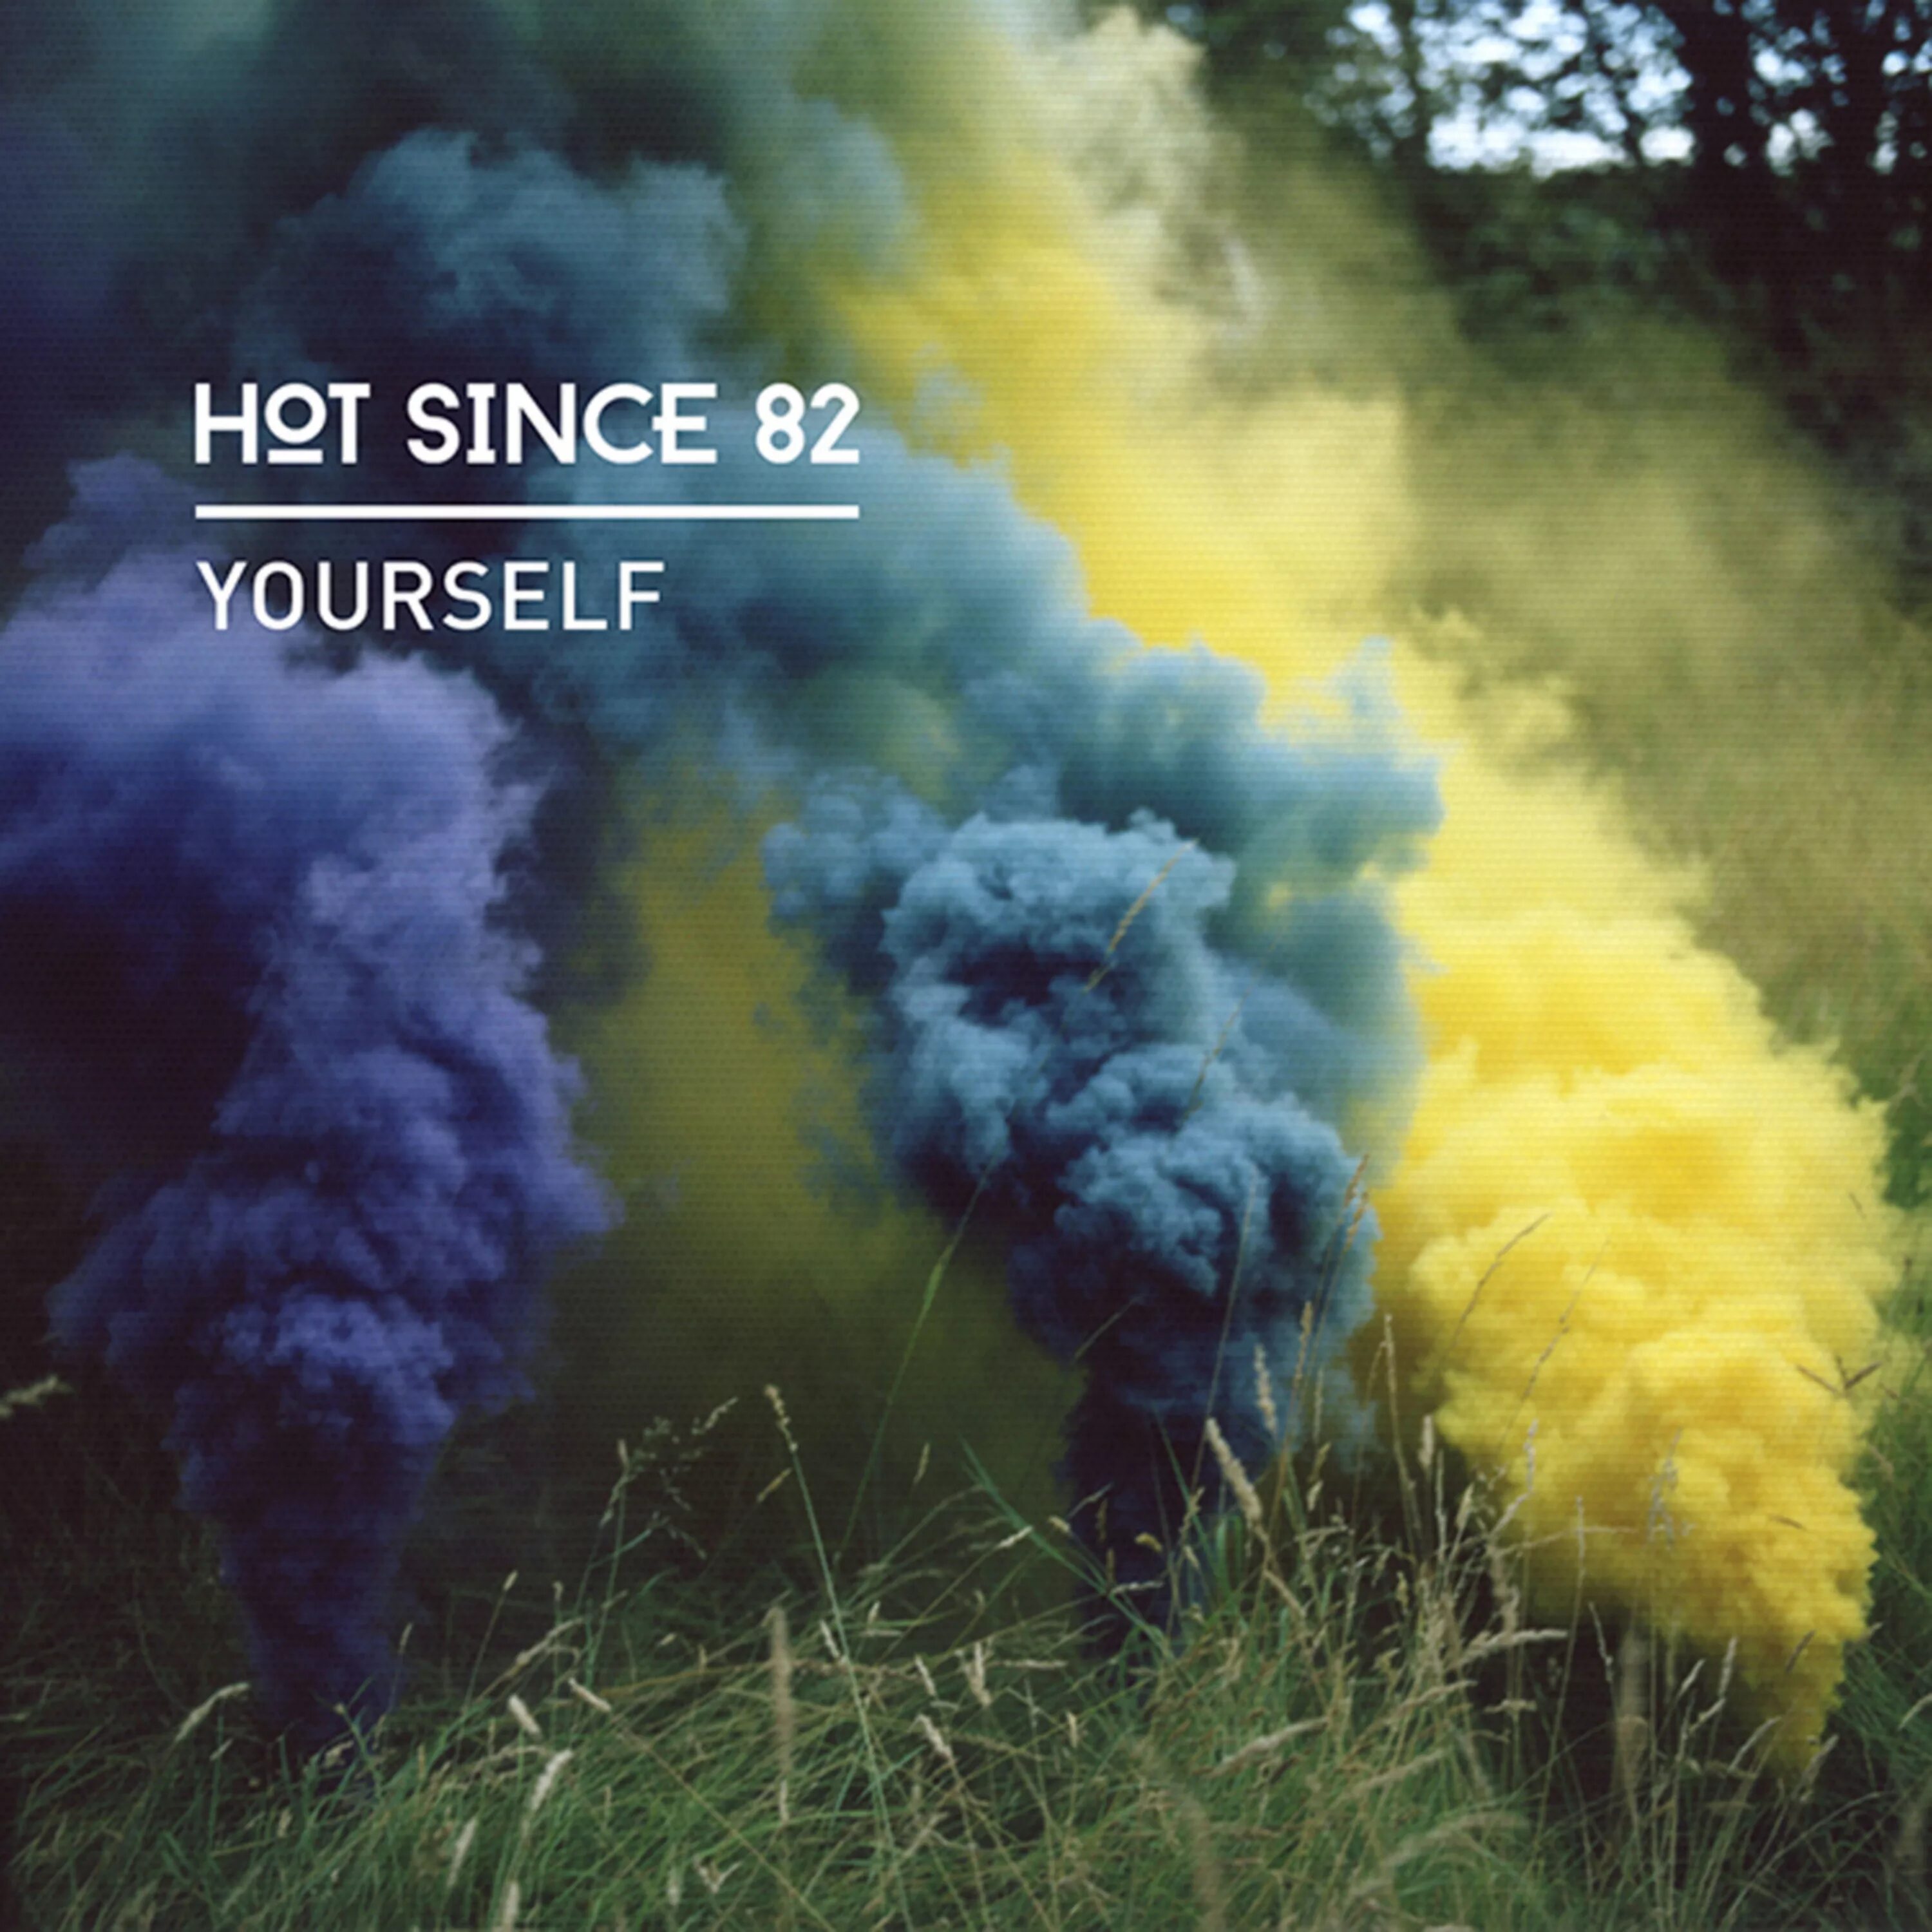 Hot since. Hot since 82. Buy yourself песня. Therapy hot since 82 feat. Alex. Hot since 82 Cecrle.